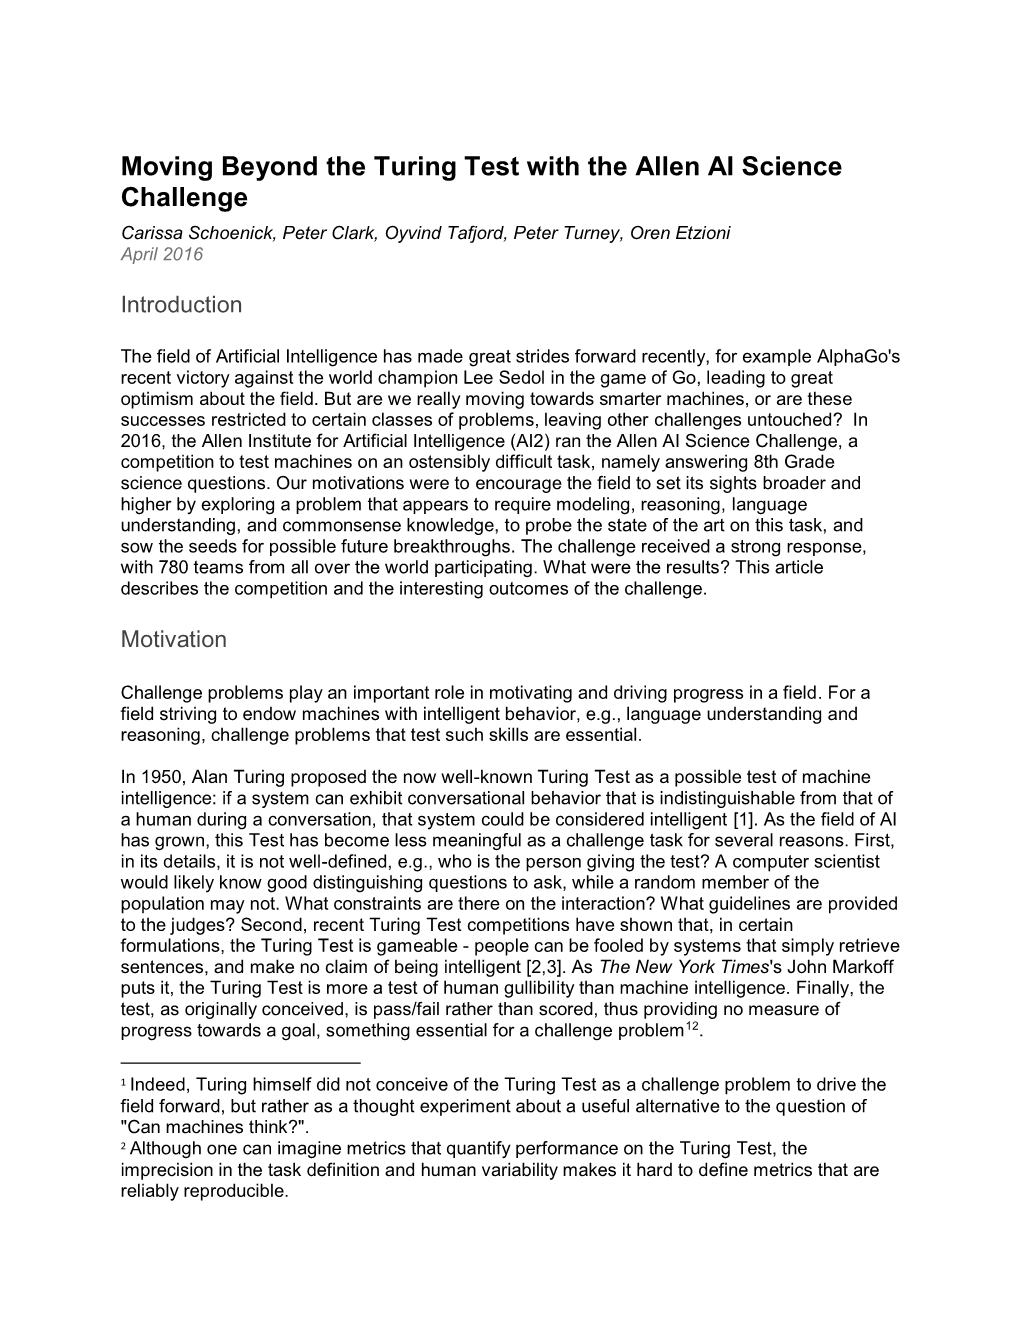 Moving Beyond the Turing Test with the Allen AI Science Challenge Carissa Schoenick, Peter Clark, Oyvind Tafjord, Peter Turney, Oren Etzioni April 2016